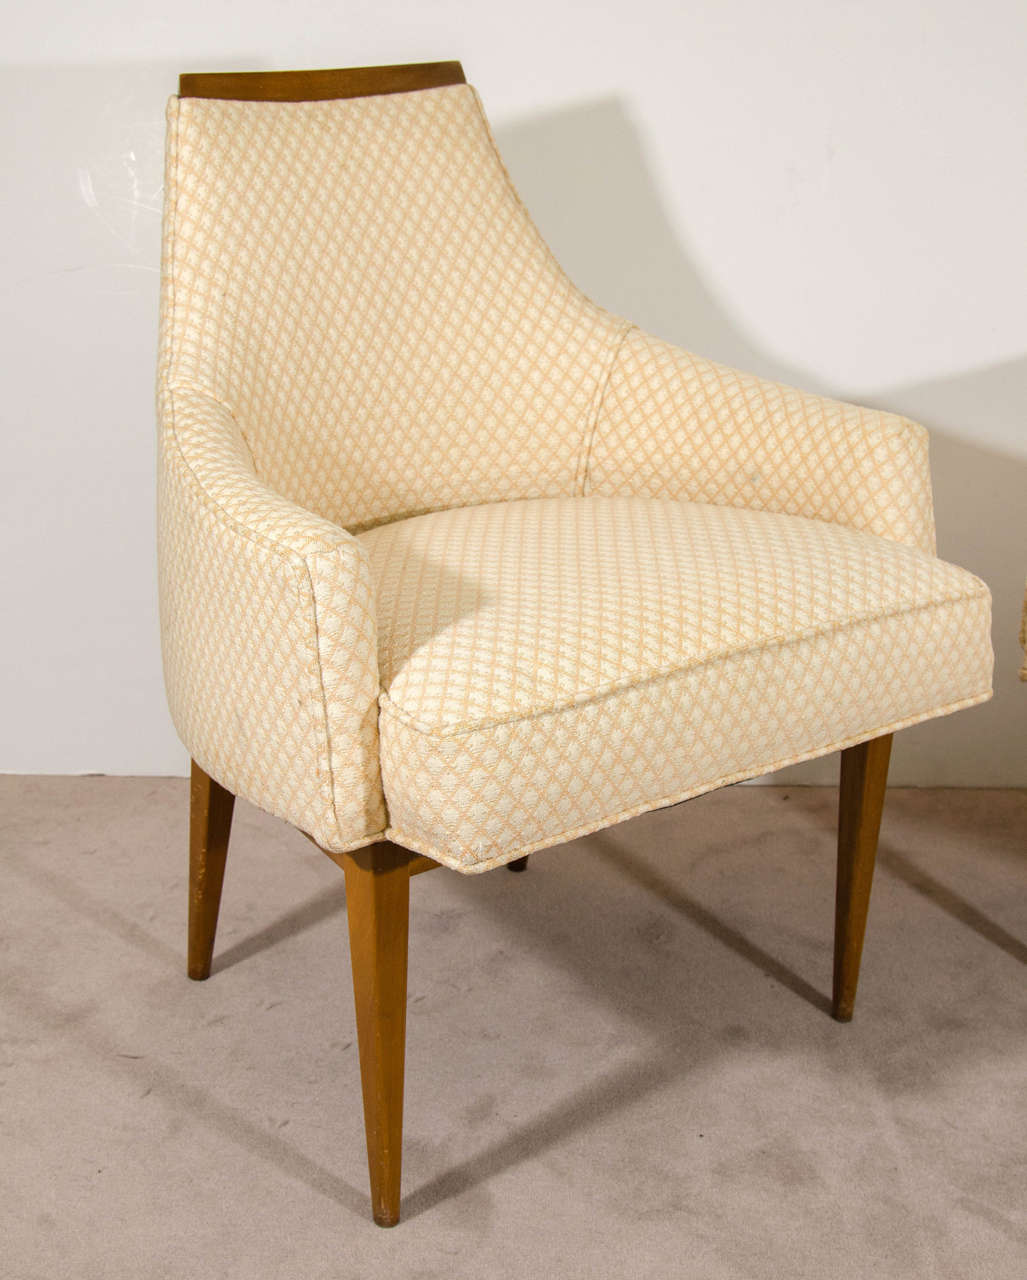 A vintage pair of lounge chairs in a cream color patterned upholstery by Paul McCobb for Calvin.

Reduced from: $1,250